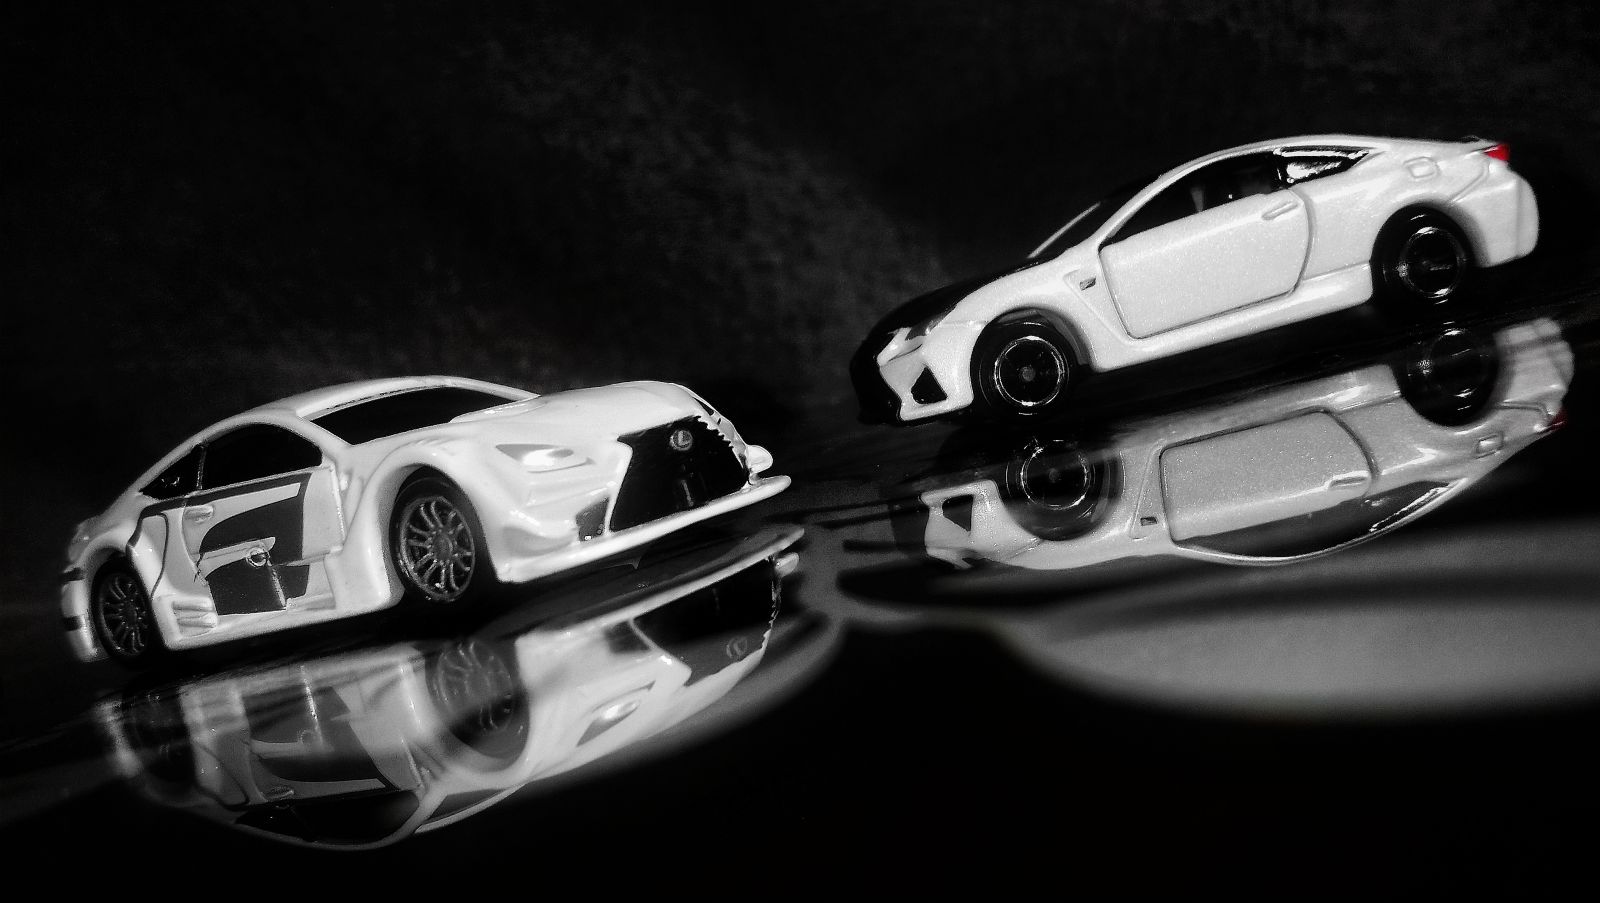 Illustration for article titled Denshitoakuma | Tomica Basic Nissan GT-R GT500 (R35/18) and Premium Lexus RC F GT500 | Inspection Room